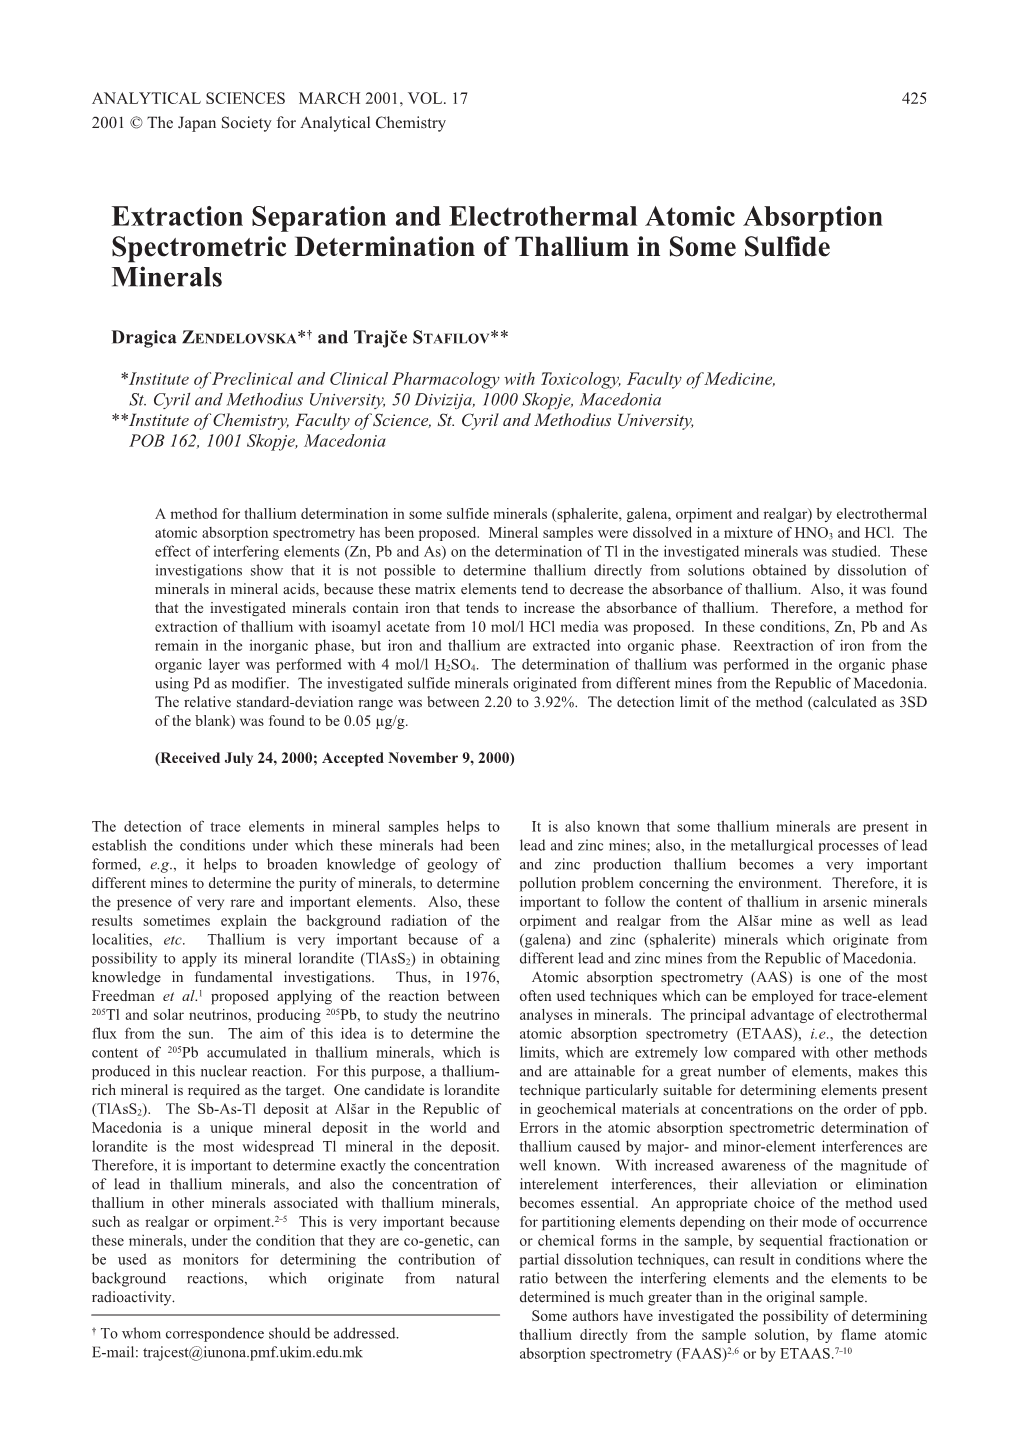 Extraction Separation and Electrothermal Atomic Absorption Spectrometric Determination of Thallium in Some Sulfide Minerals